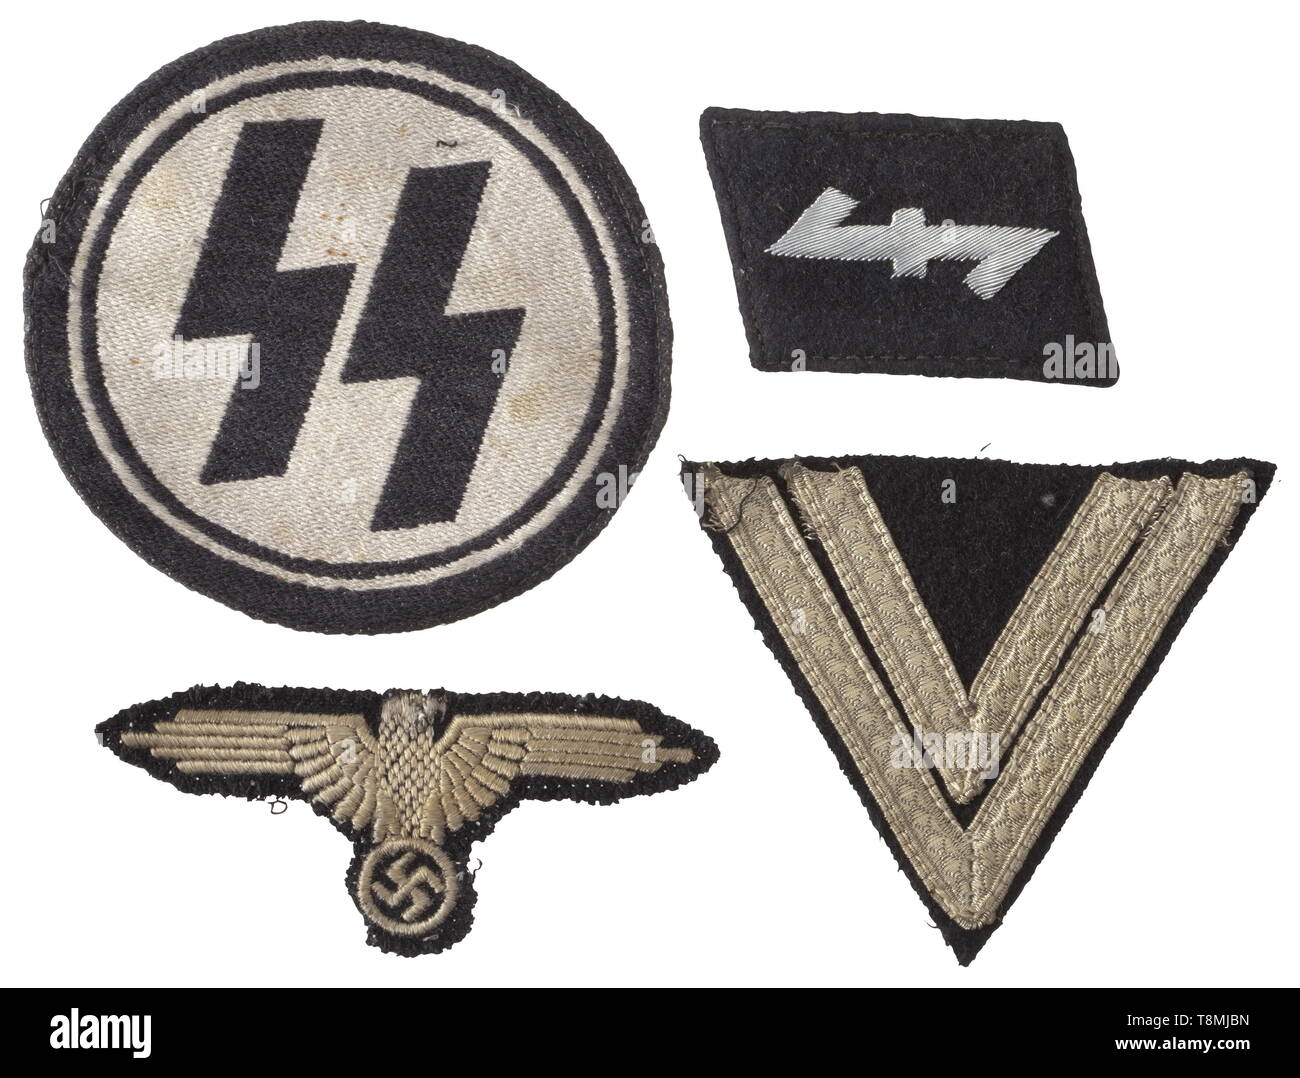 Insignia of a Dutch volunteer of the Waffen-SS A right collar patch (hand-embroidered) for NCOs in the 23rd SS Volunteer Panzergrenadier Division 'Nederland', a sports shirt emblem (woven), a sleeve eagle (machine-embroidered) and a chevron for a Rottenführer. historic, historical, 20th century, 1930s, 1940s, Waffen-SS, armed division of the SS, armed service, armed services, NS, National Socialism, Nazism, Third Reich, German Reich, Germany, military, militaria, utensil, piece of equipment, utensils, object, objects, stills, clipping, clippings, cut out, cut-out, cut-outs,, Editorial-Use-Only Stock Photo